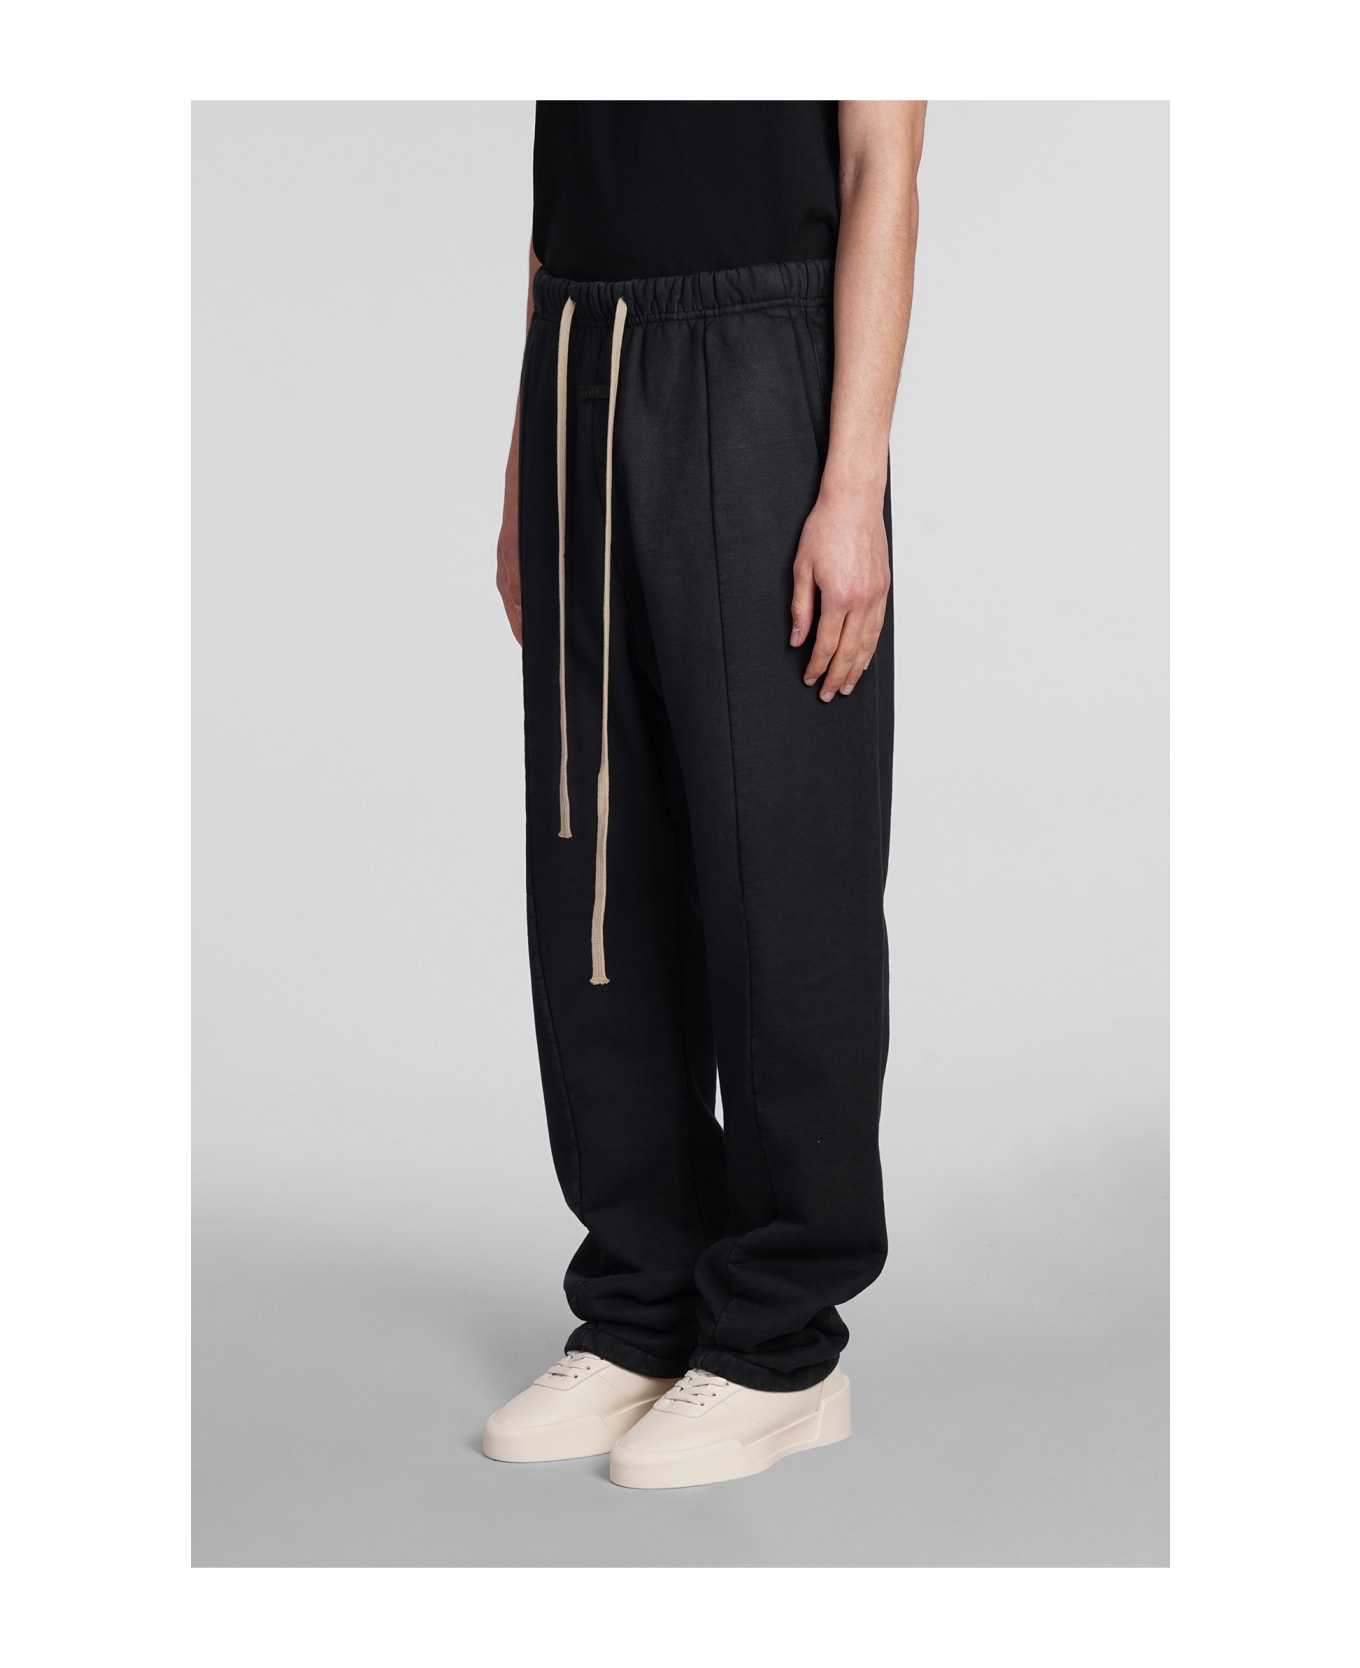 Fear of God Pants In Black Cotton - black ボトムス